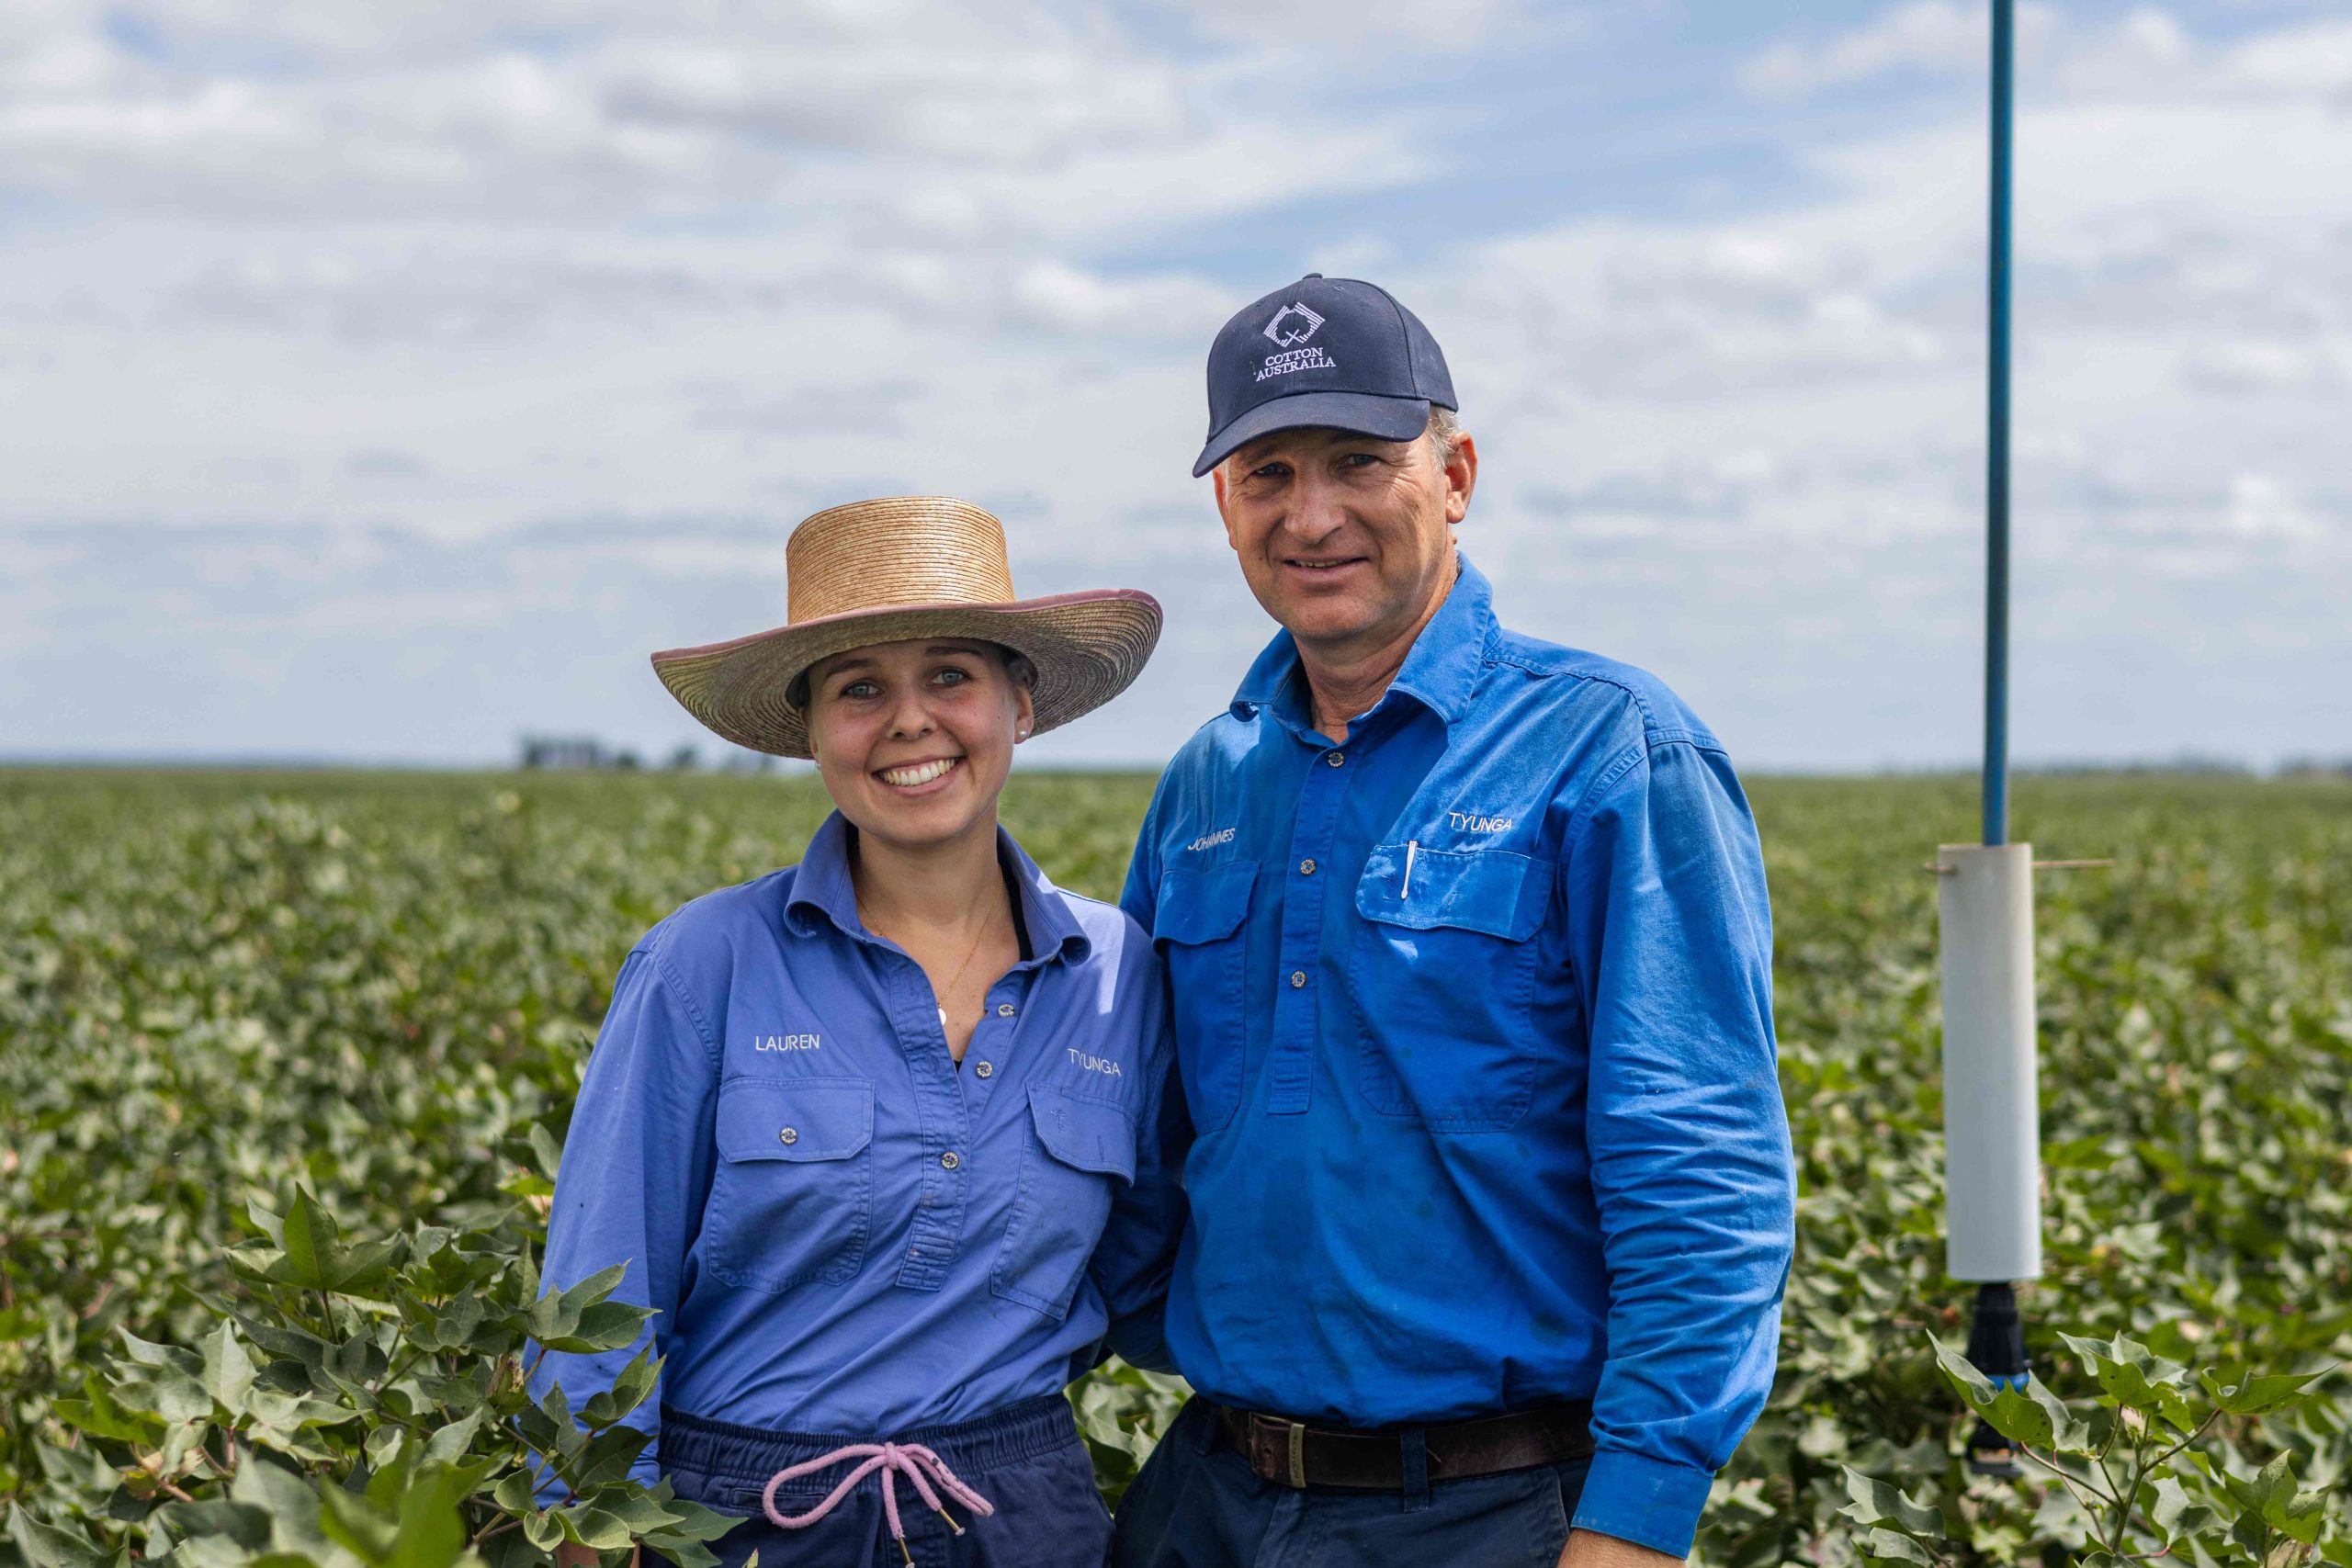 Two generations of cotton producers at Tyunga, Lauren Roellgen (left) and Johannes Roellgen (right)